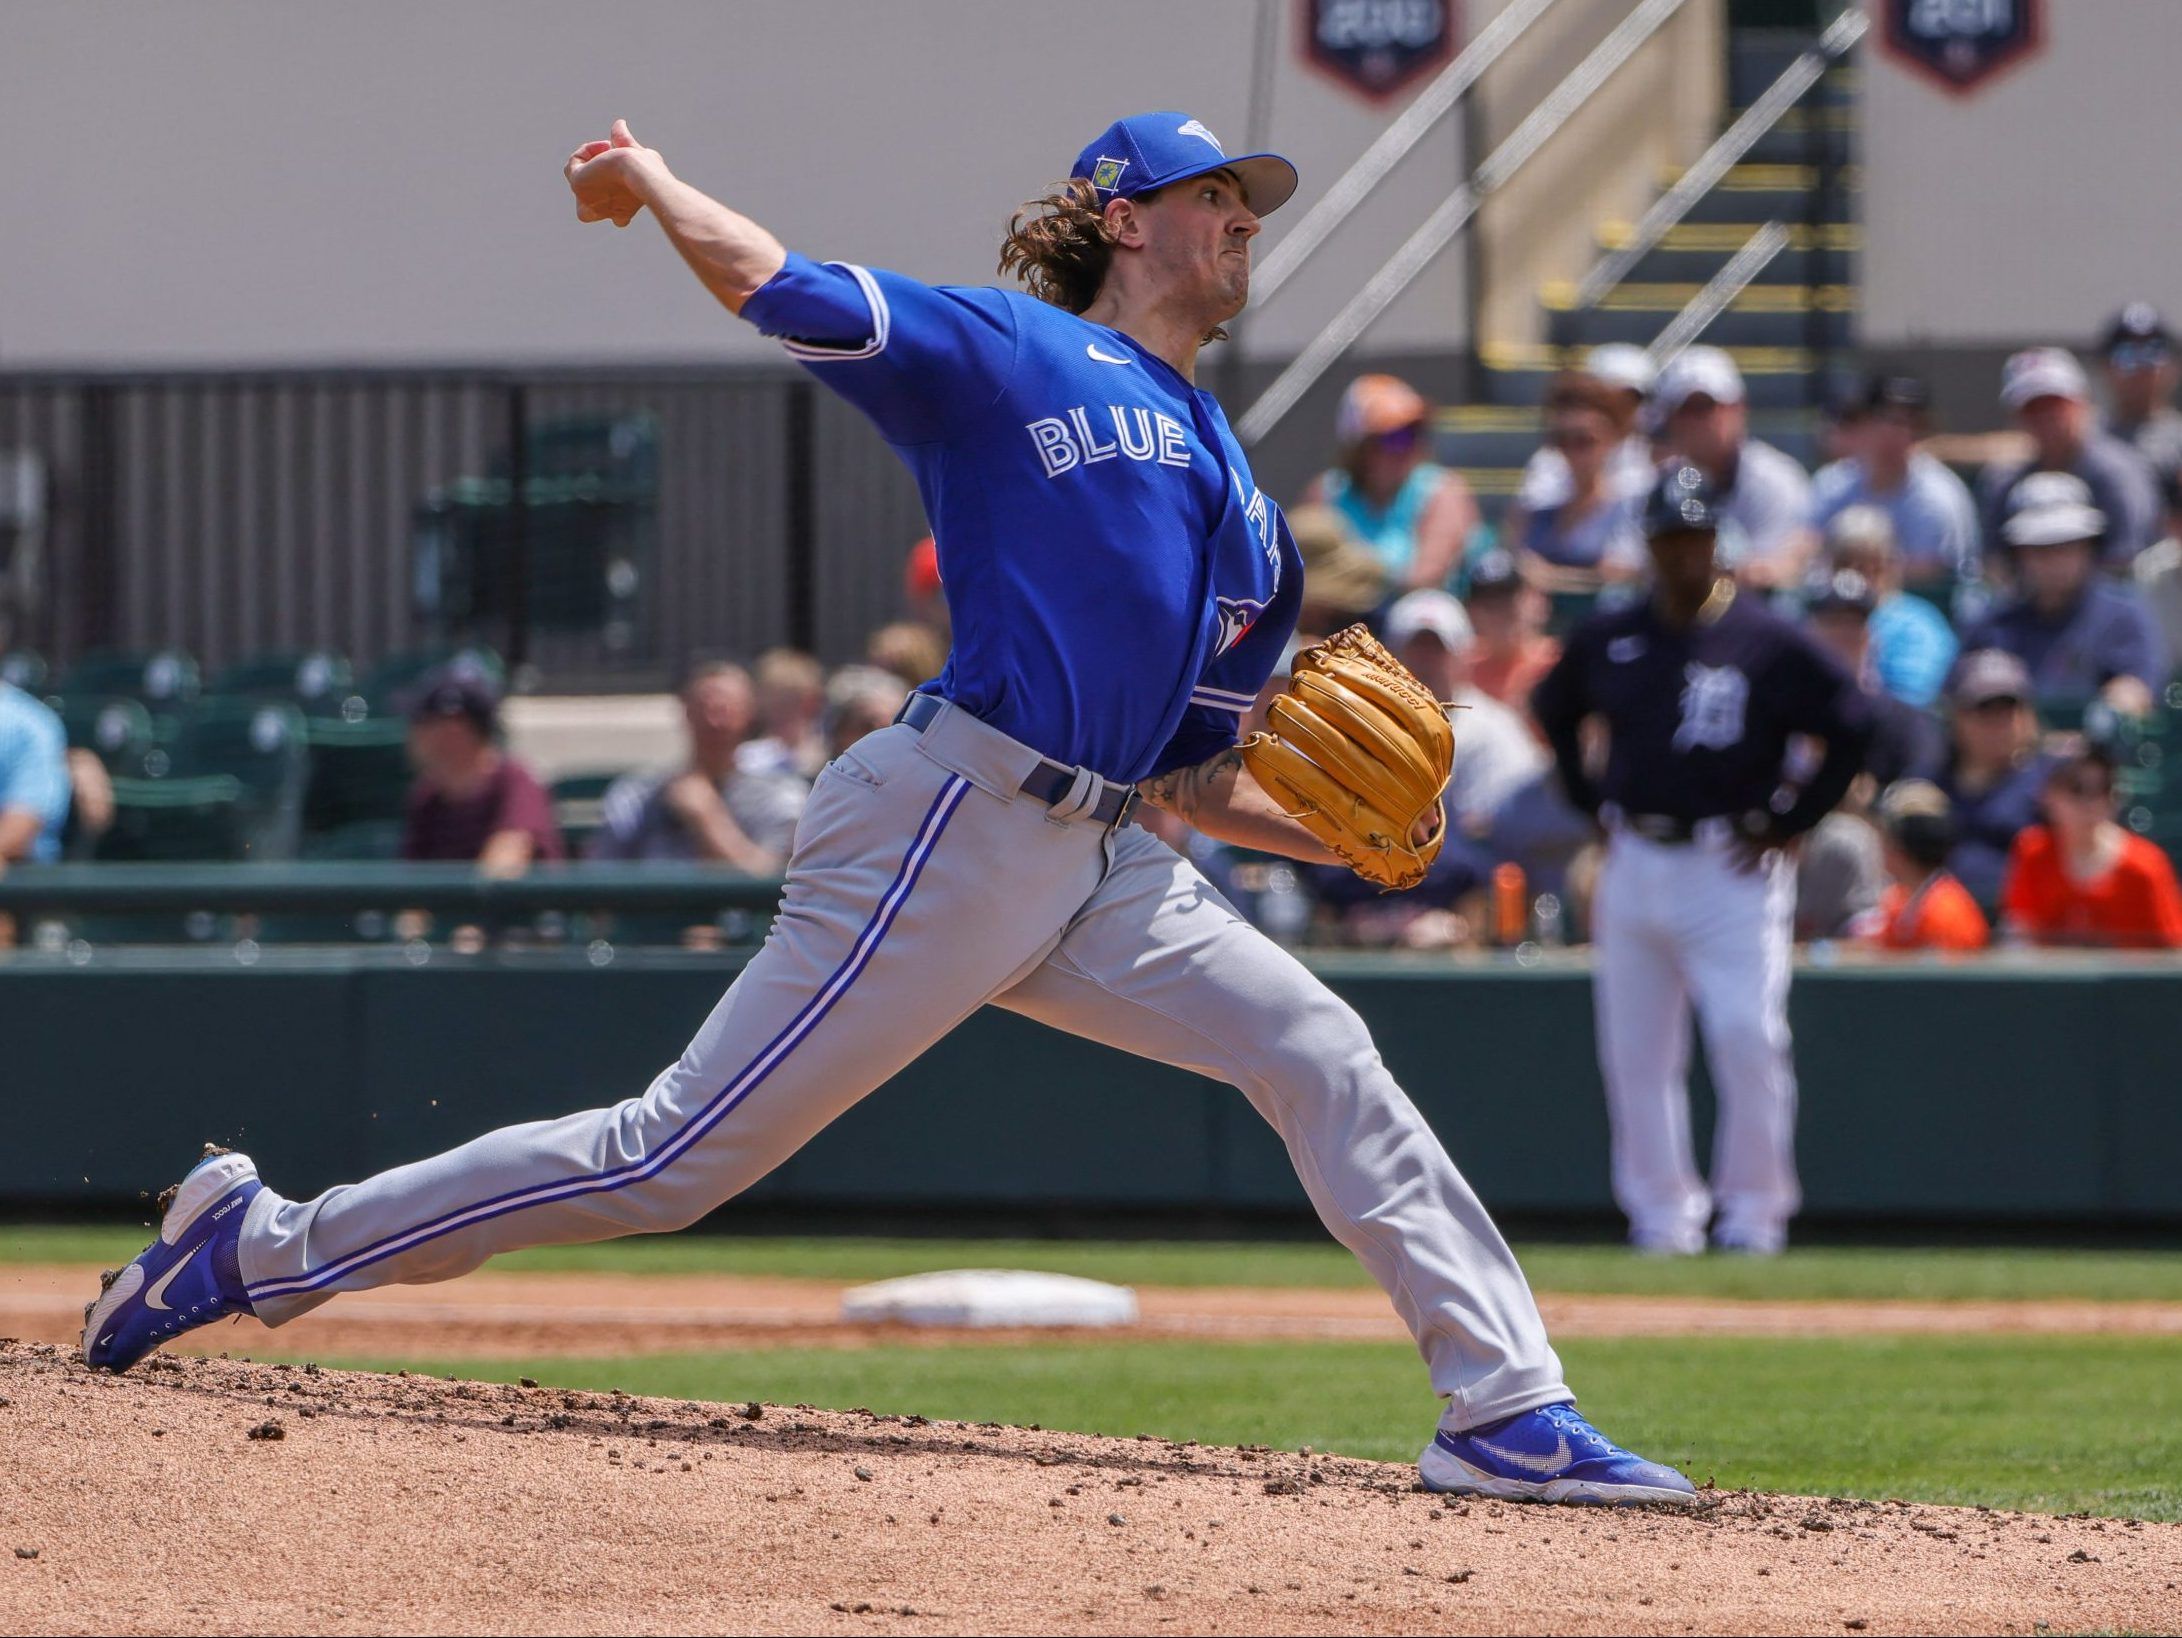 Blue Jays relievers Adam Cimber and Tim Mayza go head-to-head in